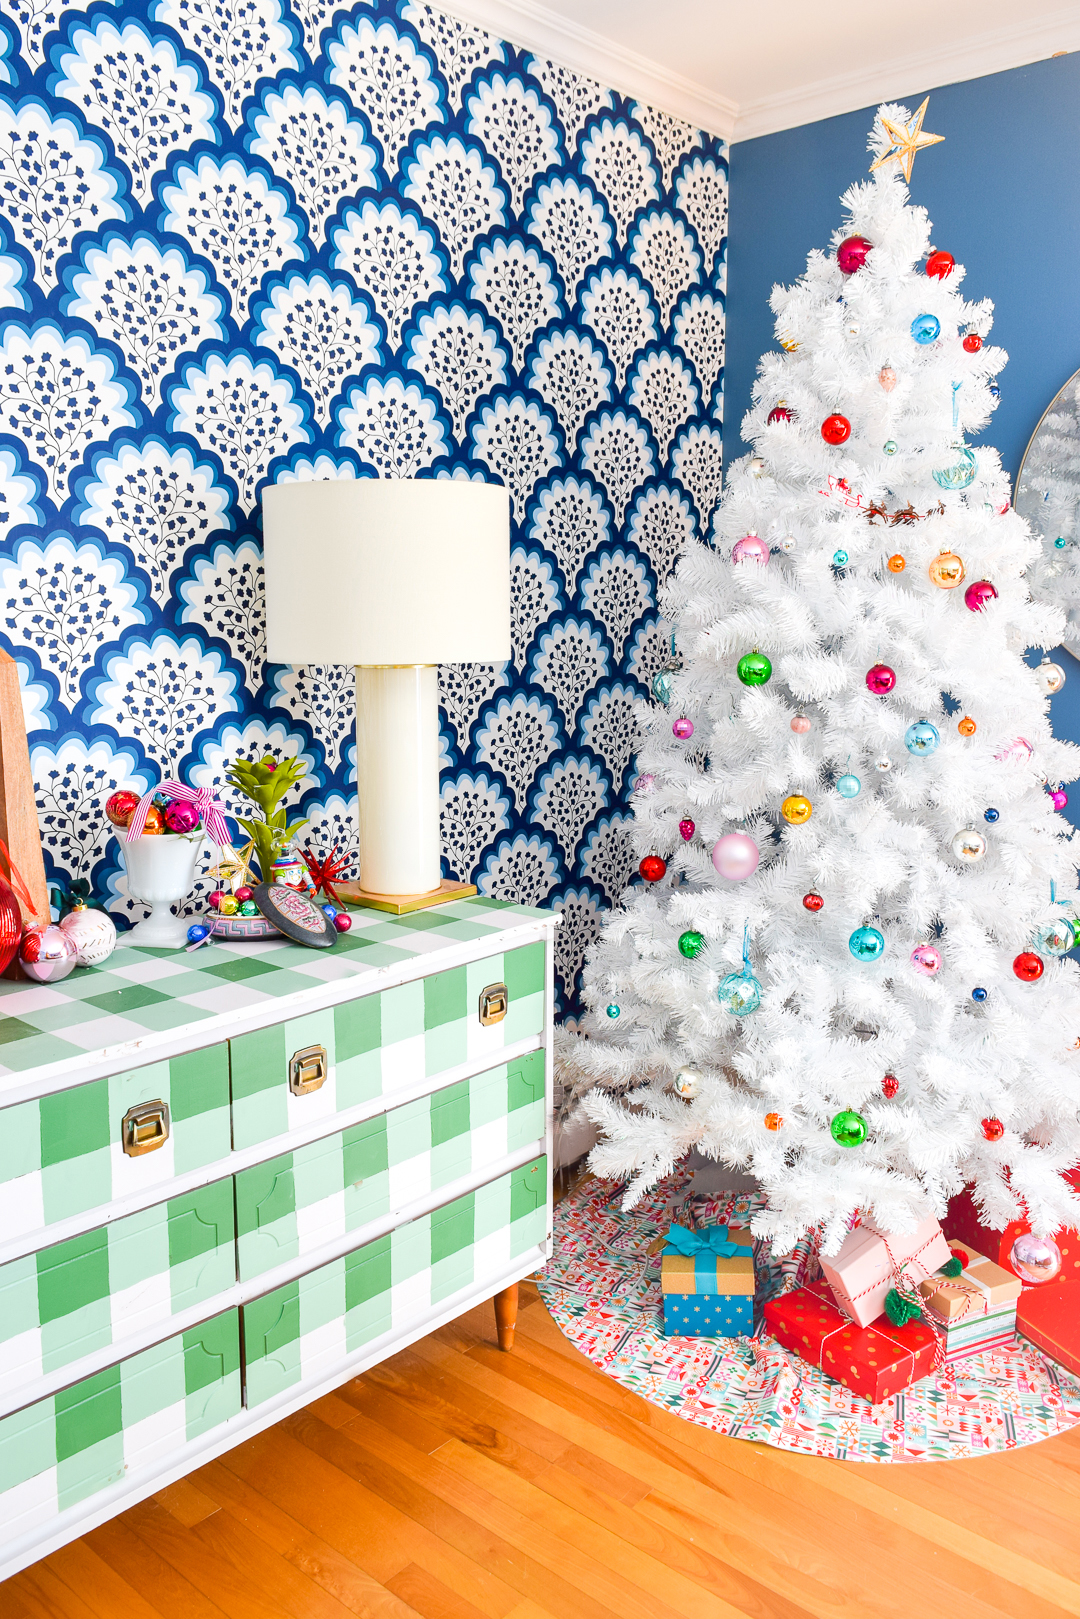 I've got the tree up, the ornaments out, and am showing an odd amount of restraint this year when it comes to accessorizing. Come check out my Retro & Colourful Christmas Living Room! #christmastour #christmasdecor #colourfulchristmas